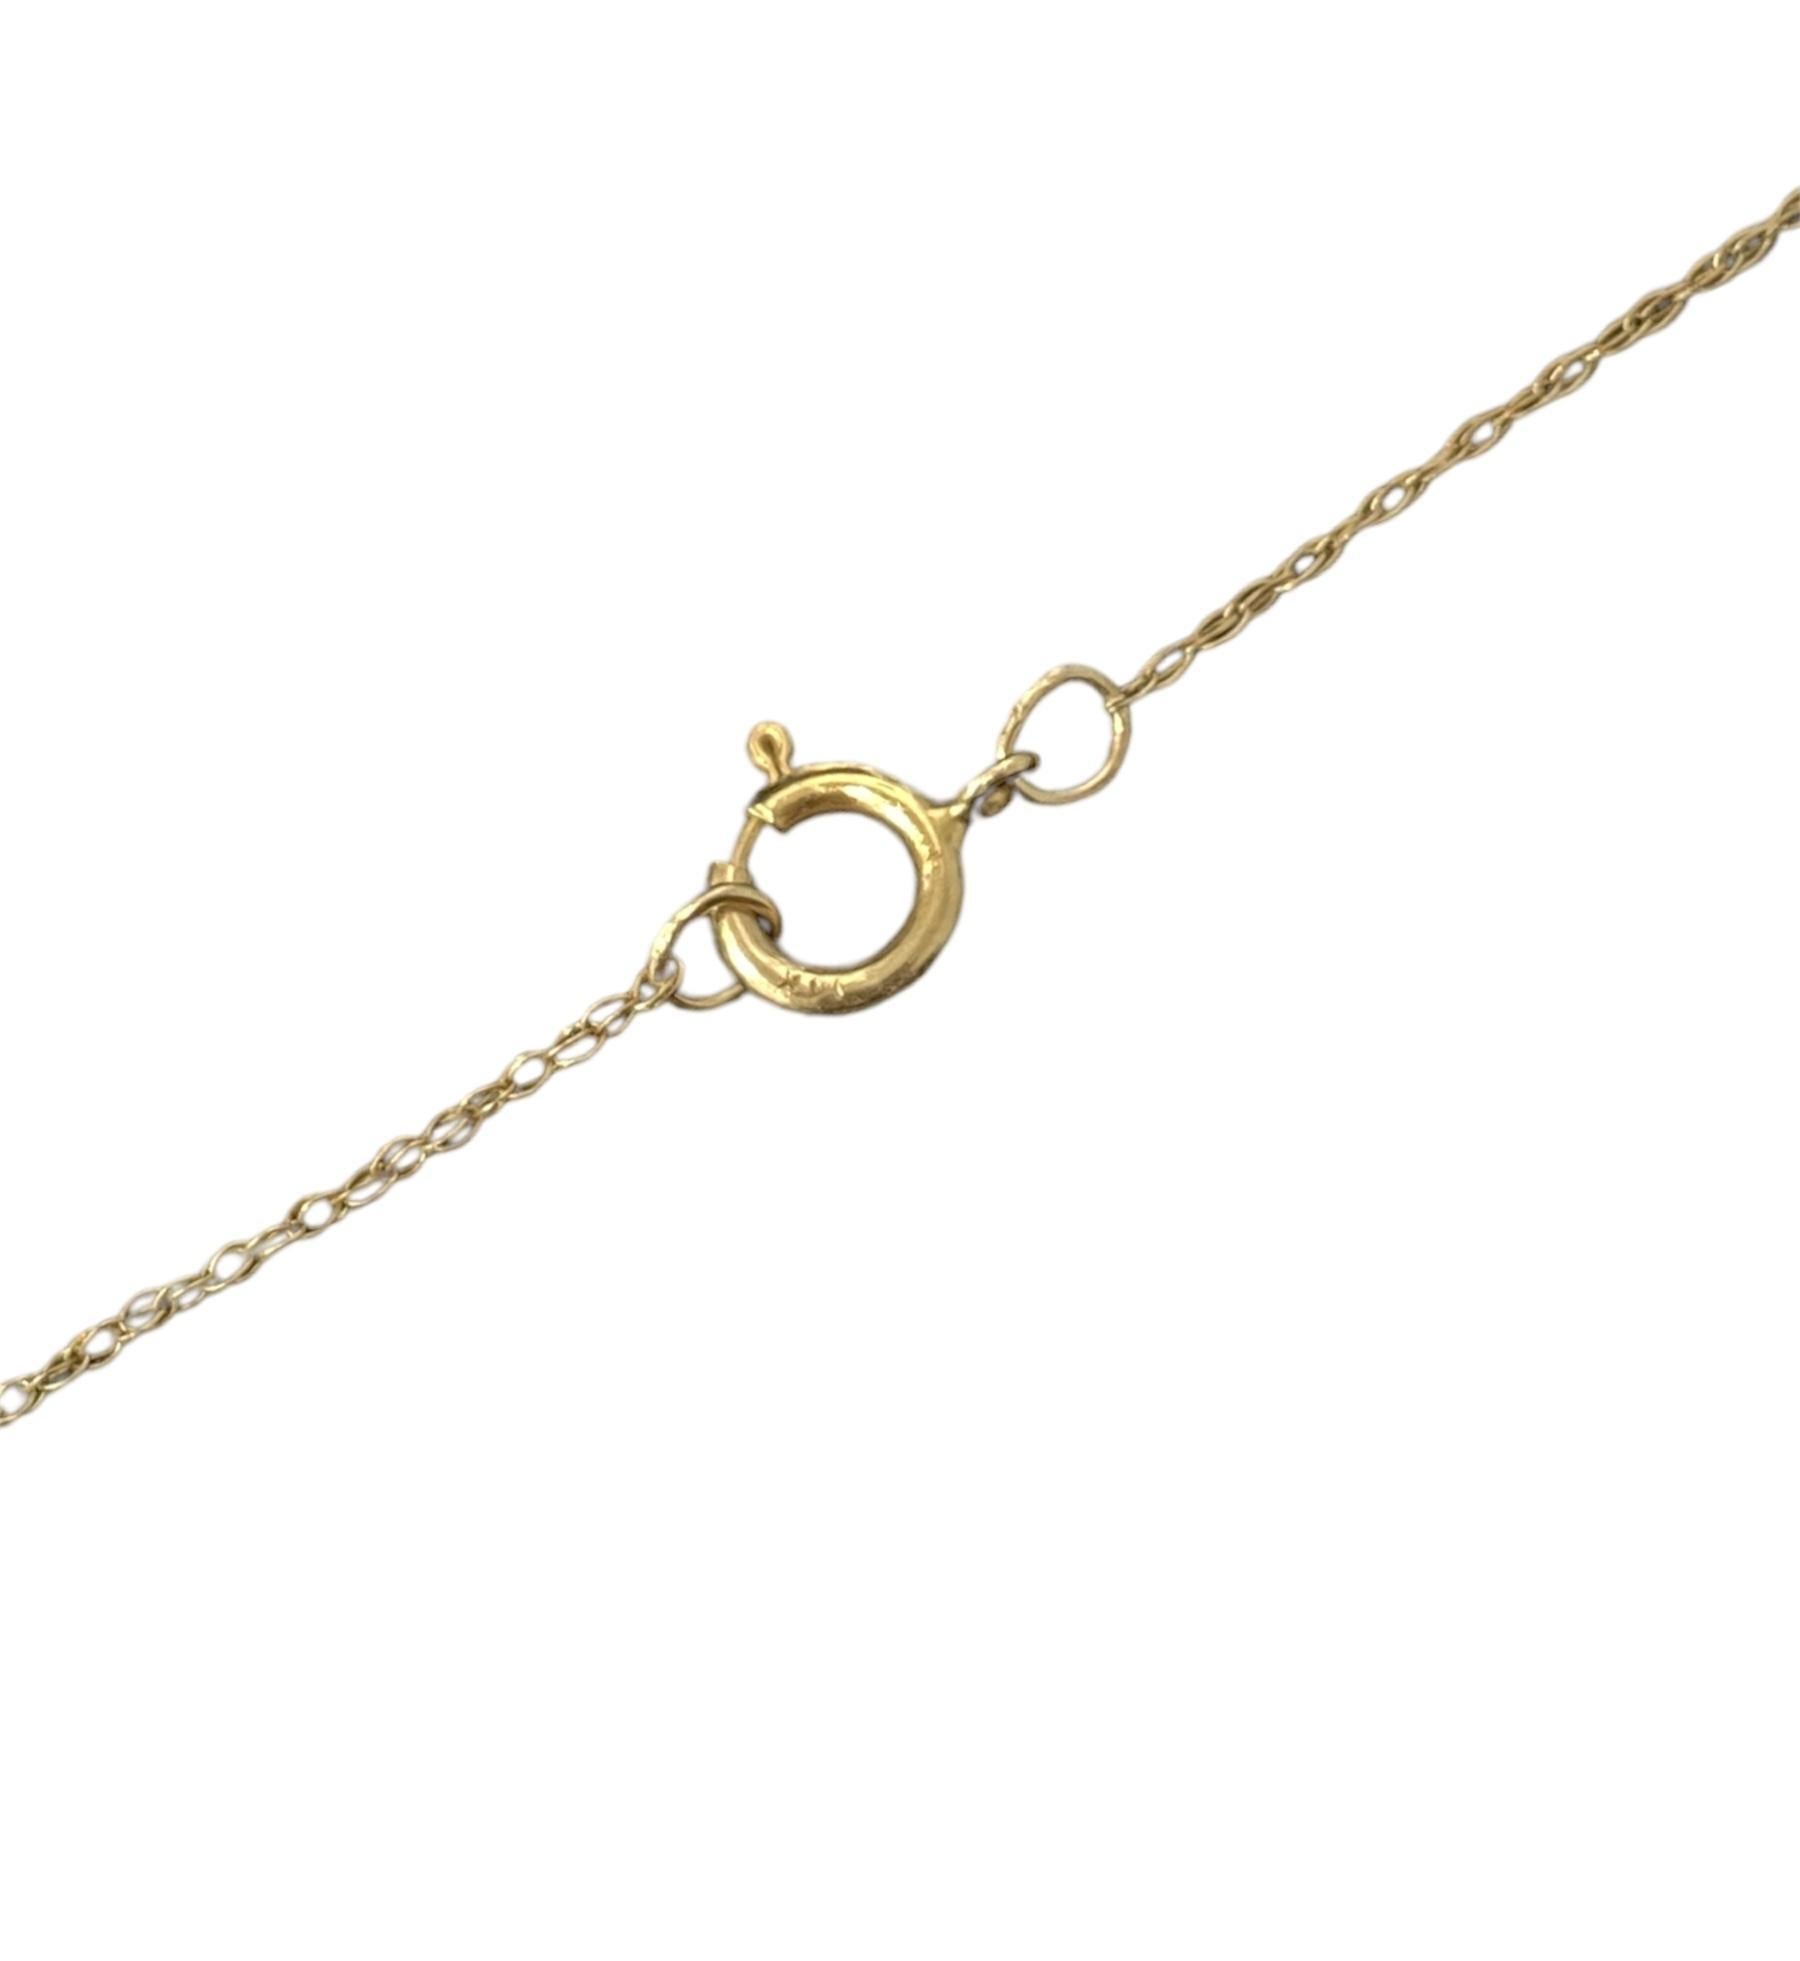 14K Chai Hebrew Natural Diamond Pendant is a stunning and meaningful piece of jewelry that artfully combines cultural significance with timeless elegance.
This pendant is crafted from high-quality 14-karat gold, featuring the Hebrew word
